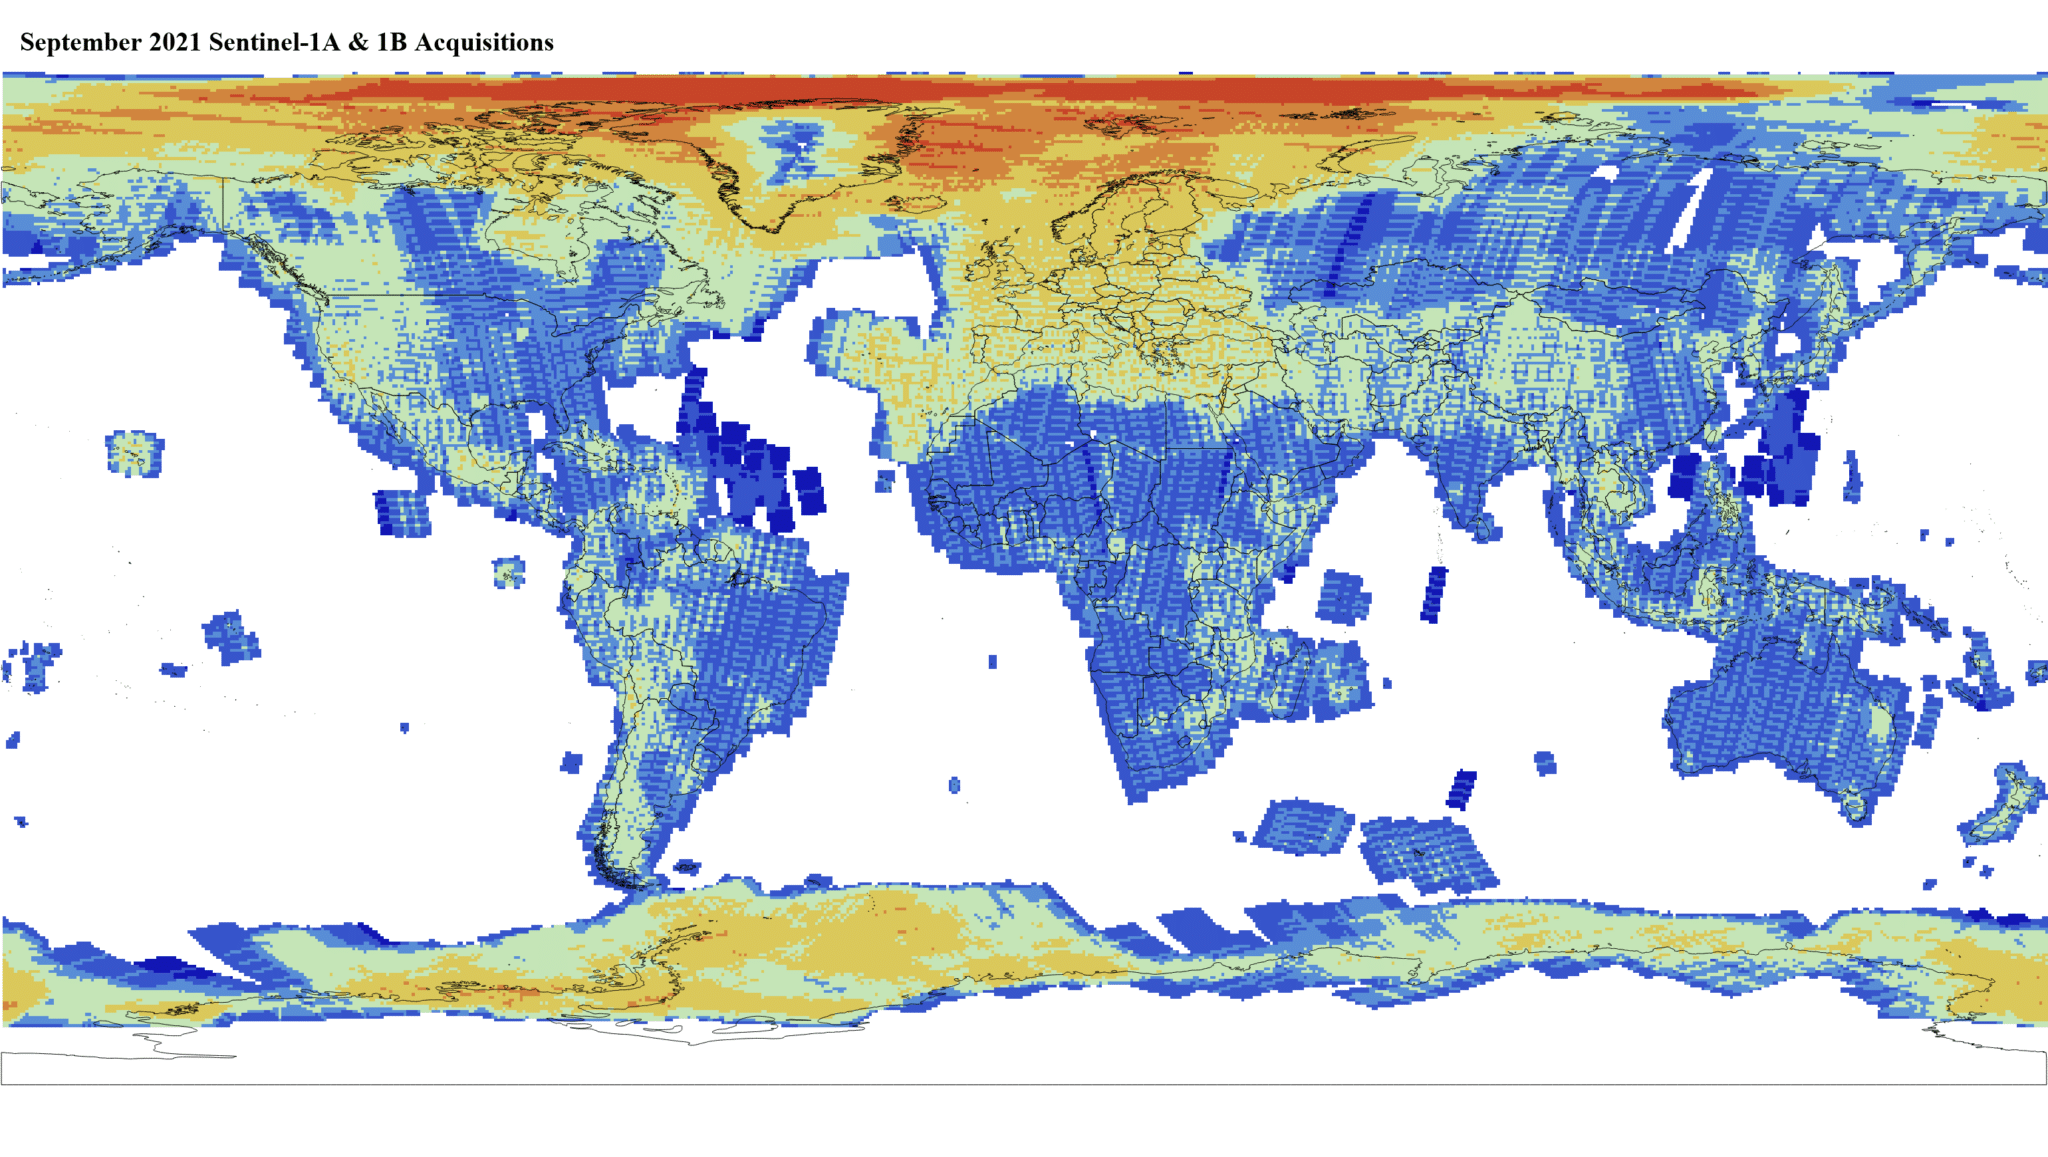 Heat map of Sentinel-1A and -1B GRD global acquisitions September 2021